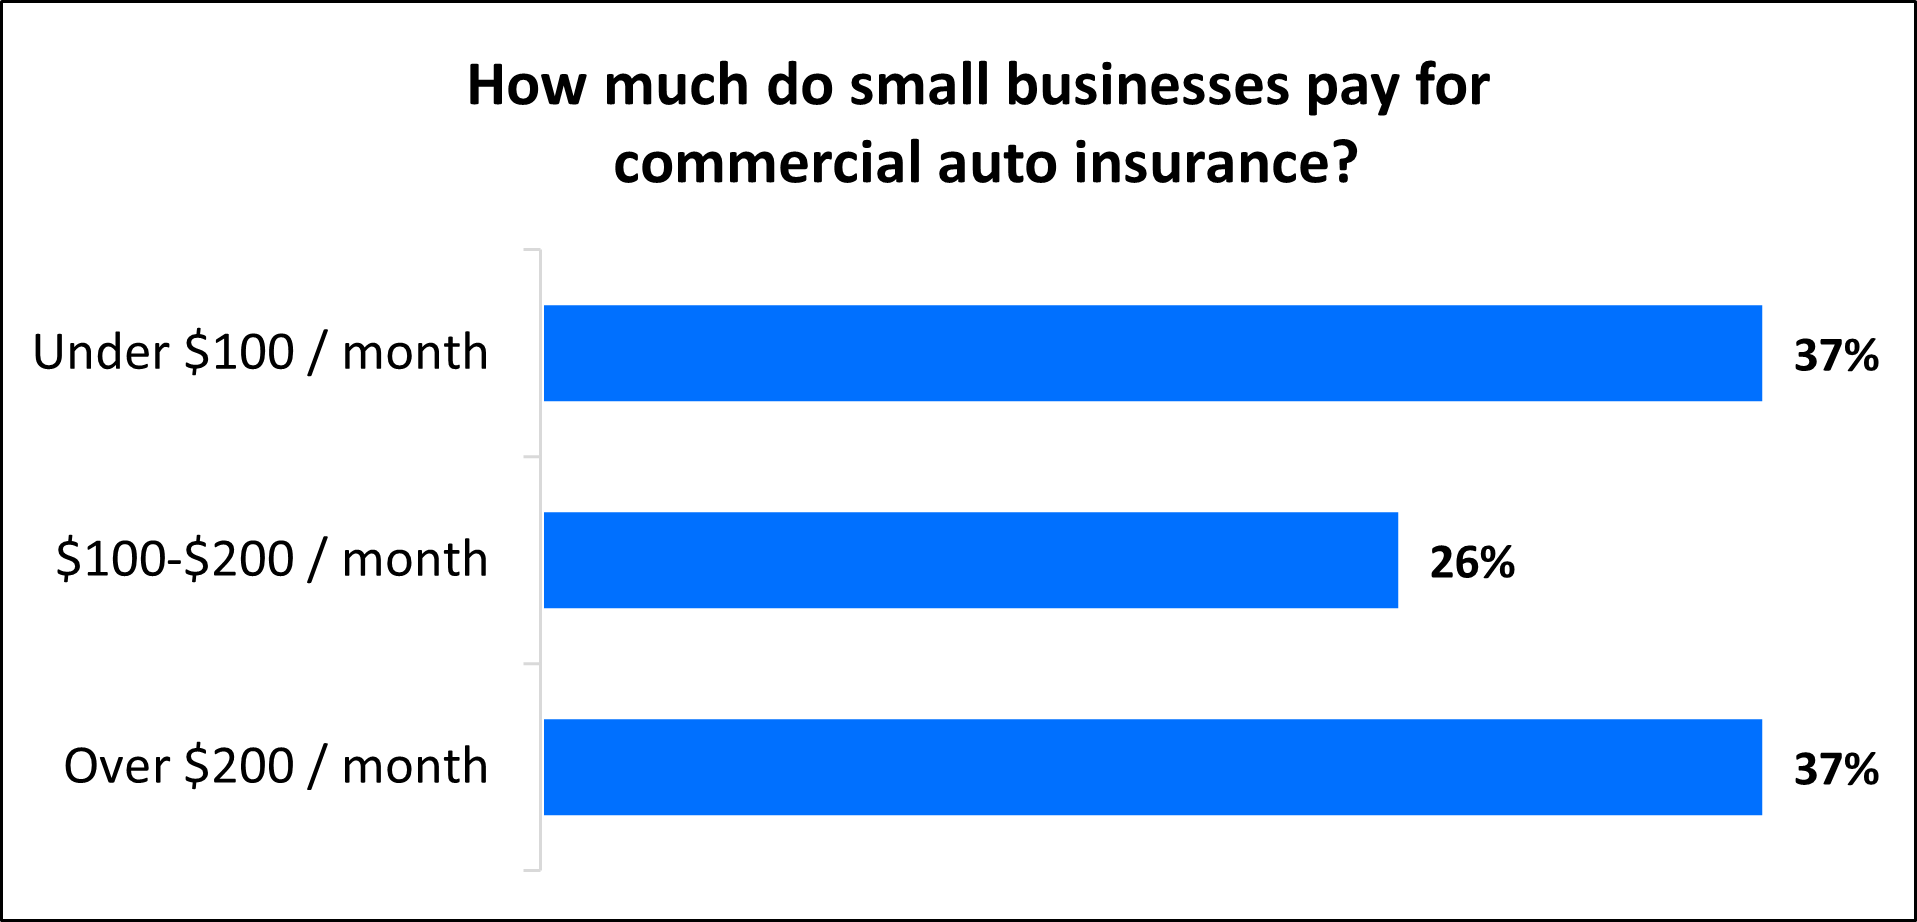 How much do small businesses pay for commercial auto insurance with TechInsurance?